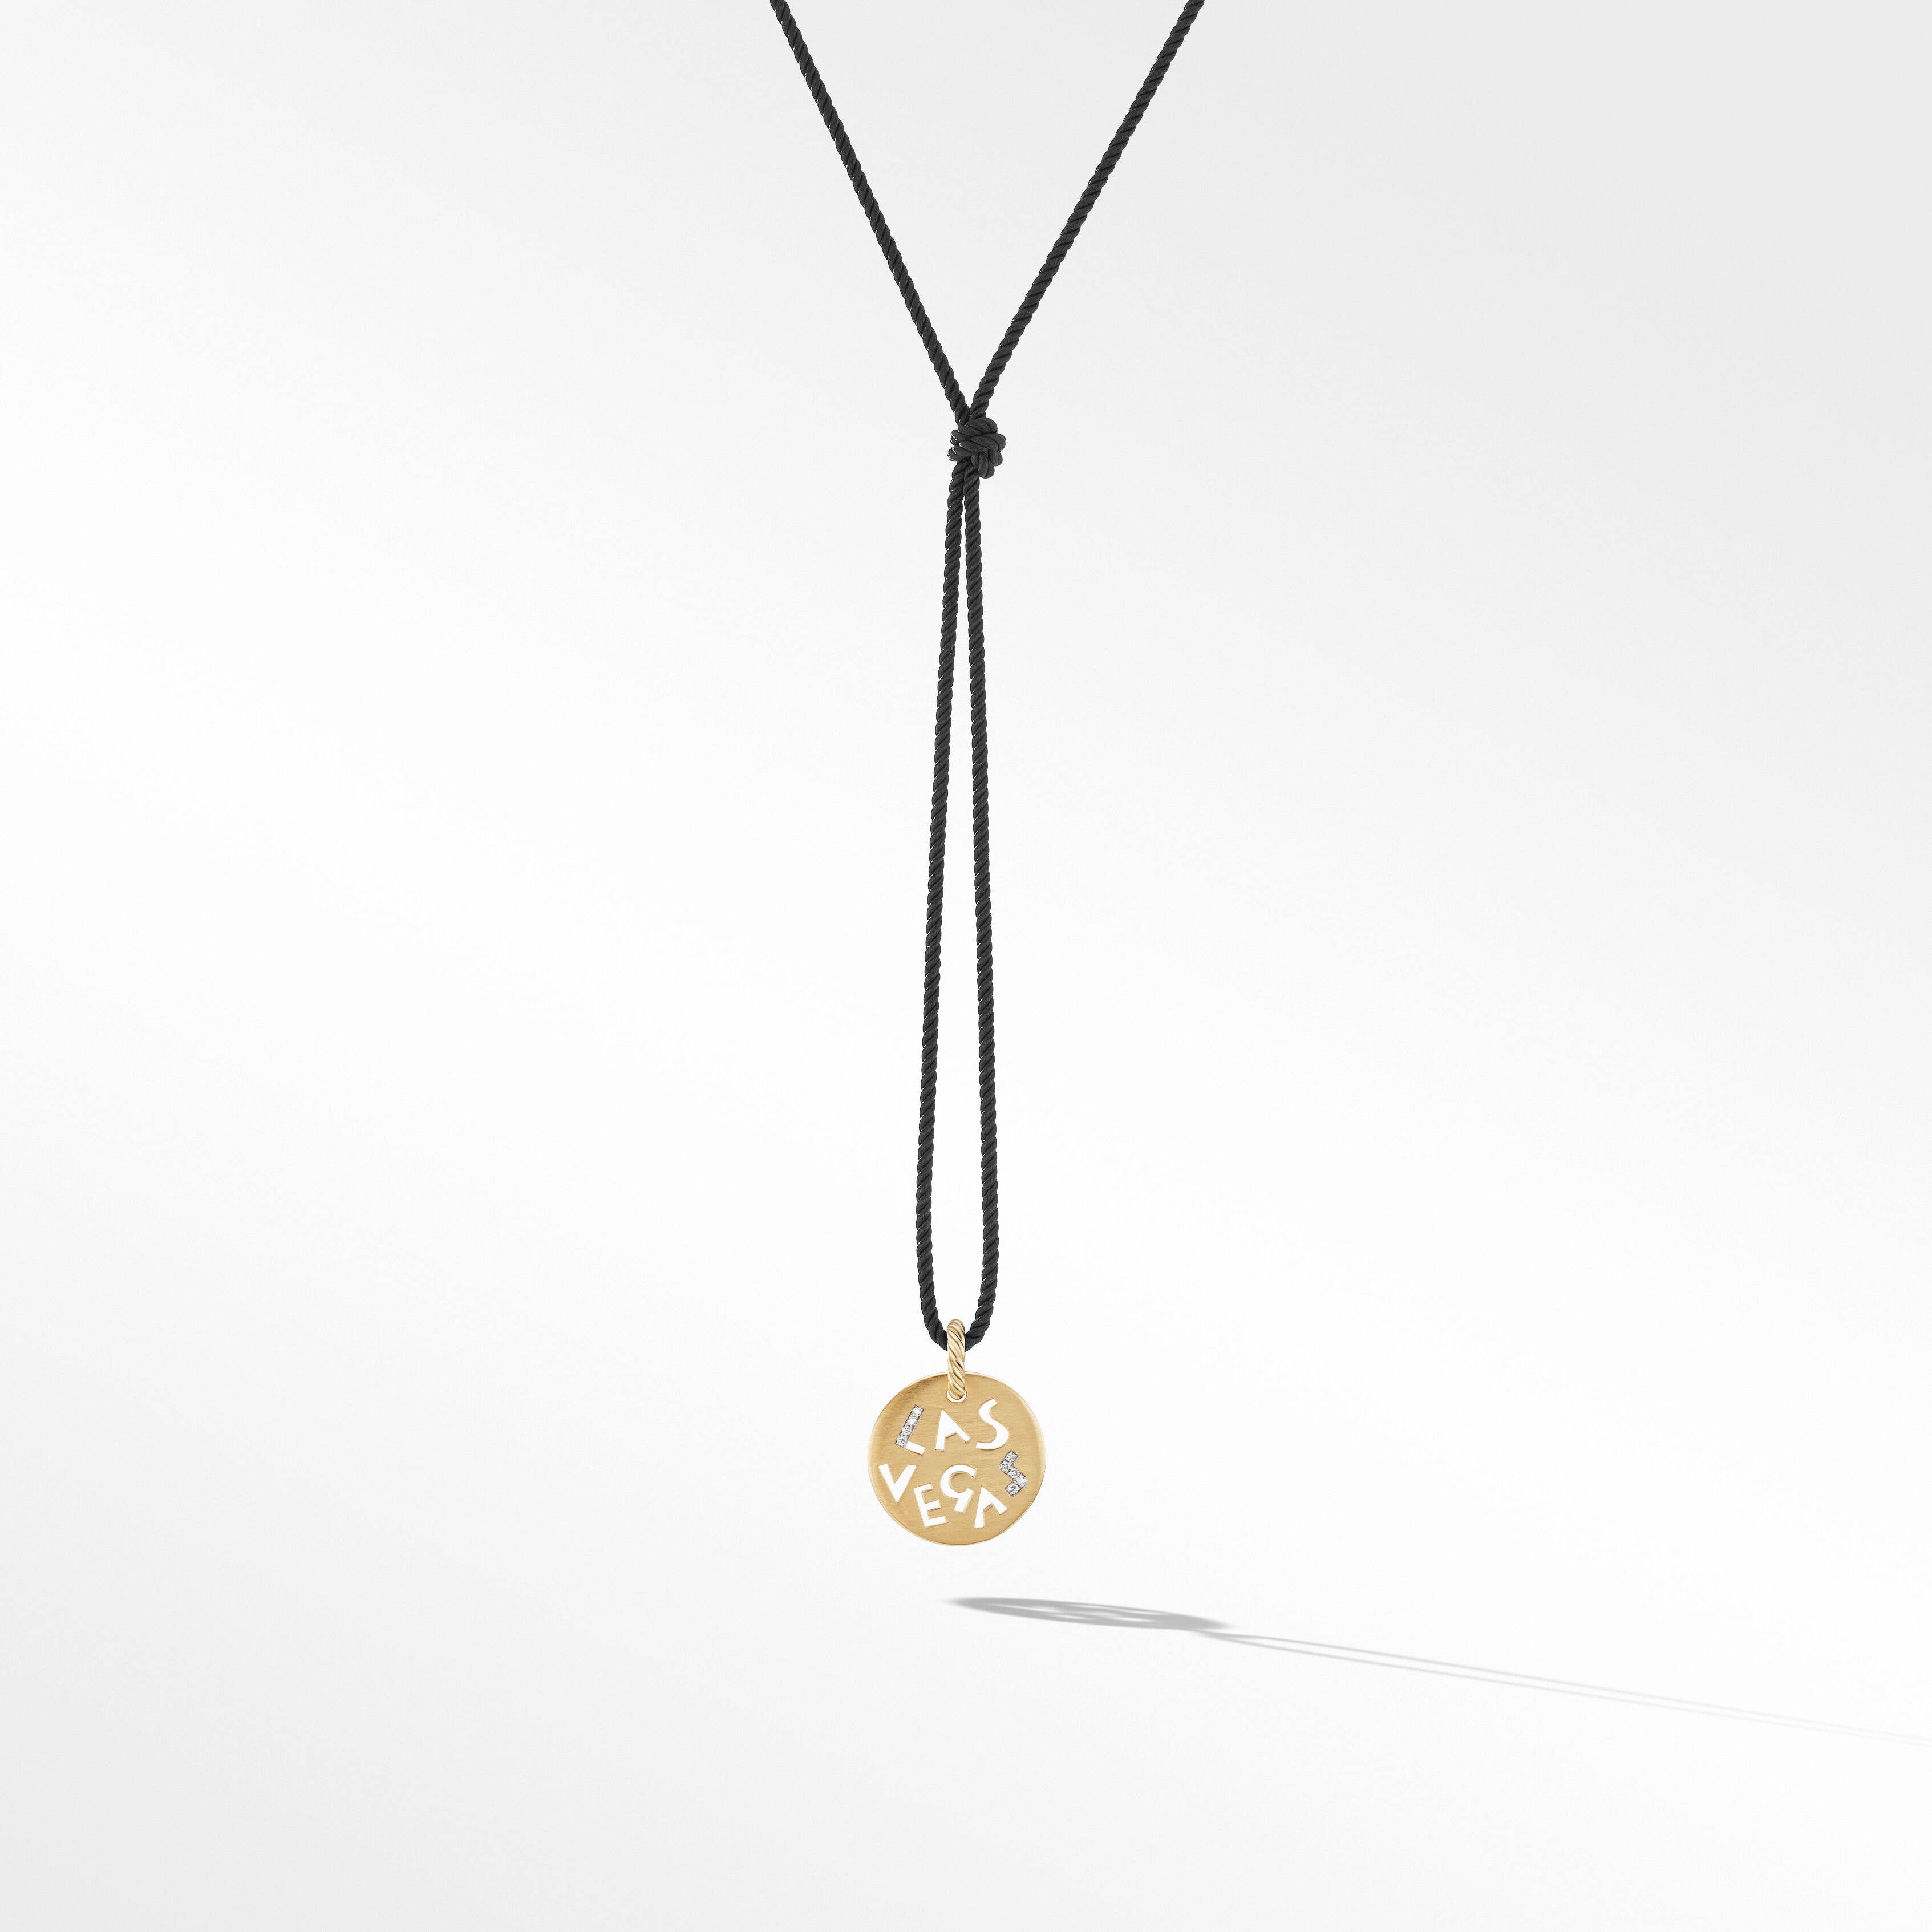 DY Elements® Las Vegas Pendant Necklace in 18K Yellow Gold with Diamonds